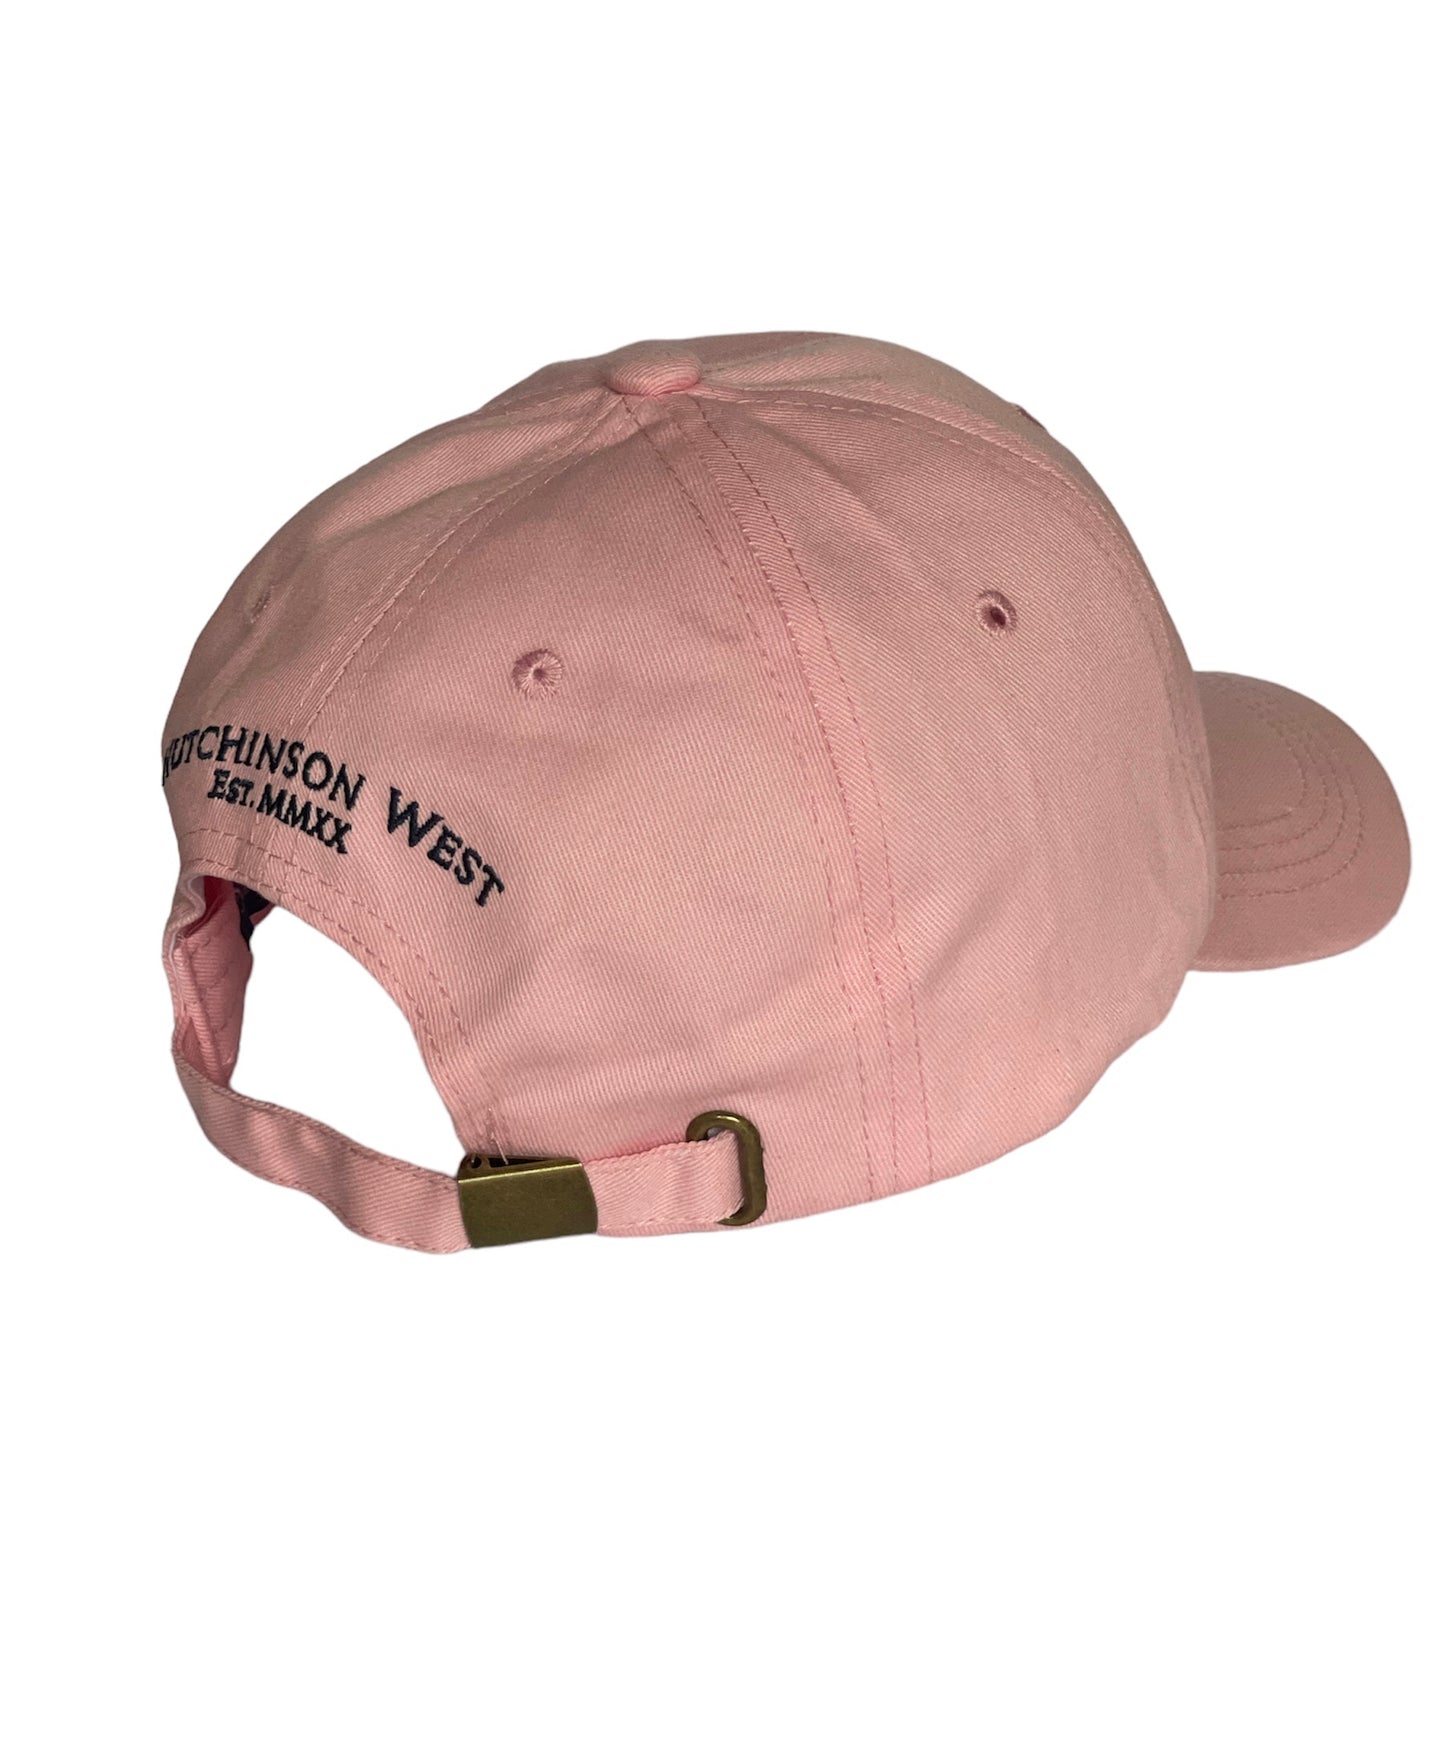 BASEBALL CAP PINK WITH NAVY EMBROIDERED PHEASANT INSIGNIA